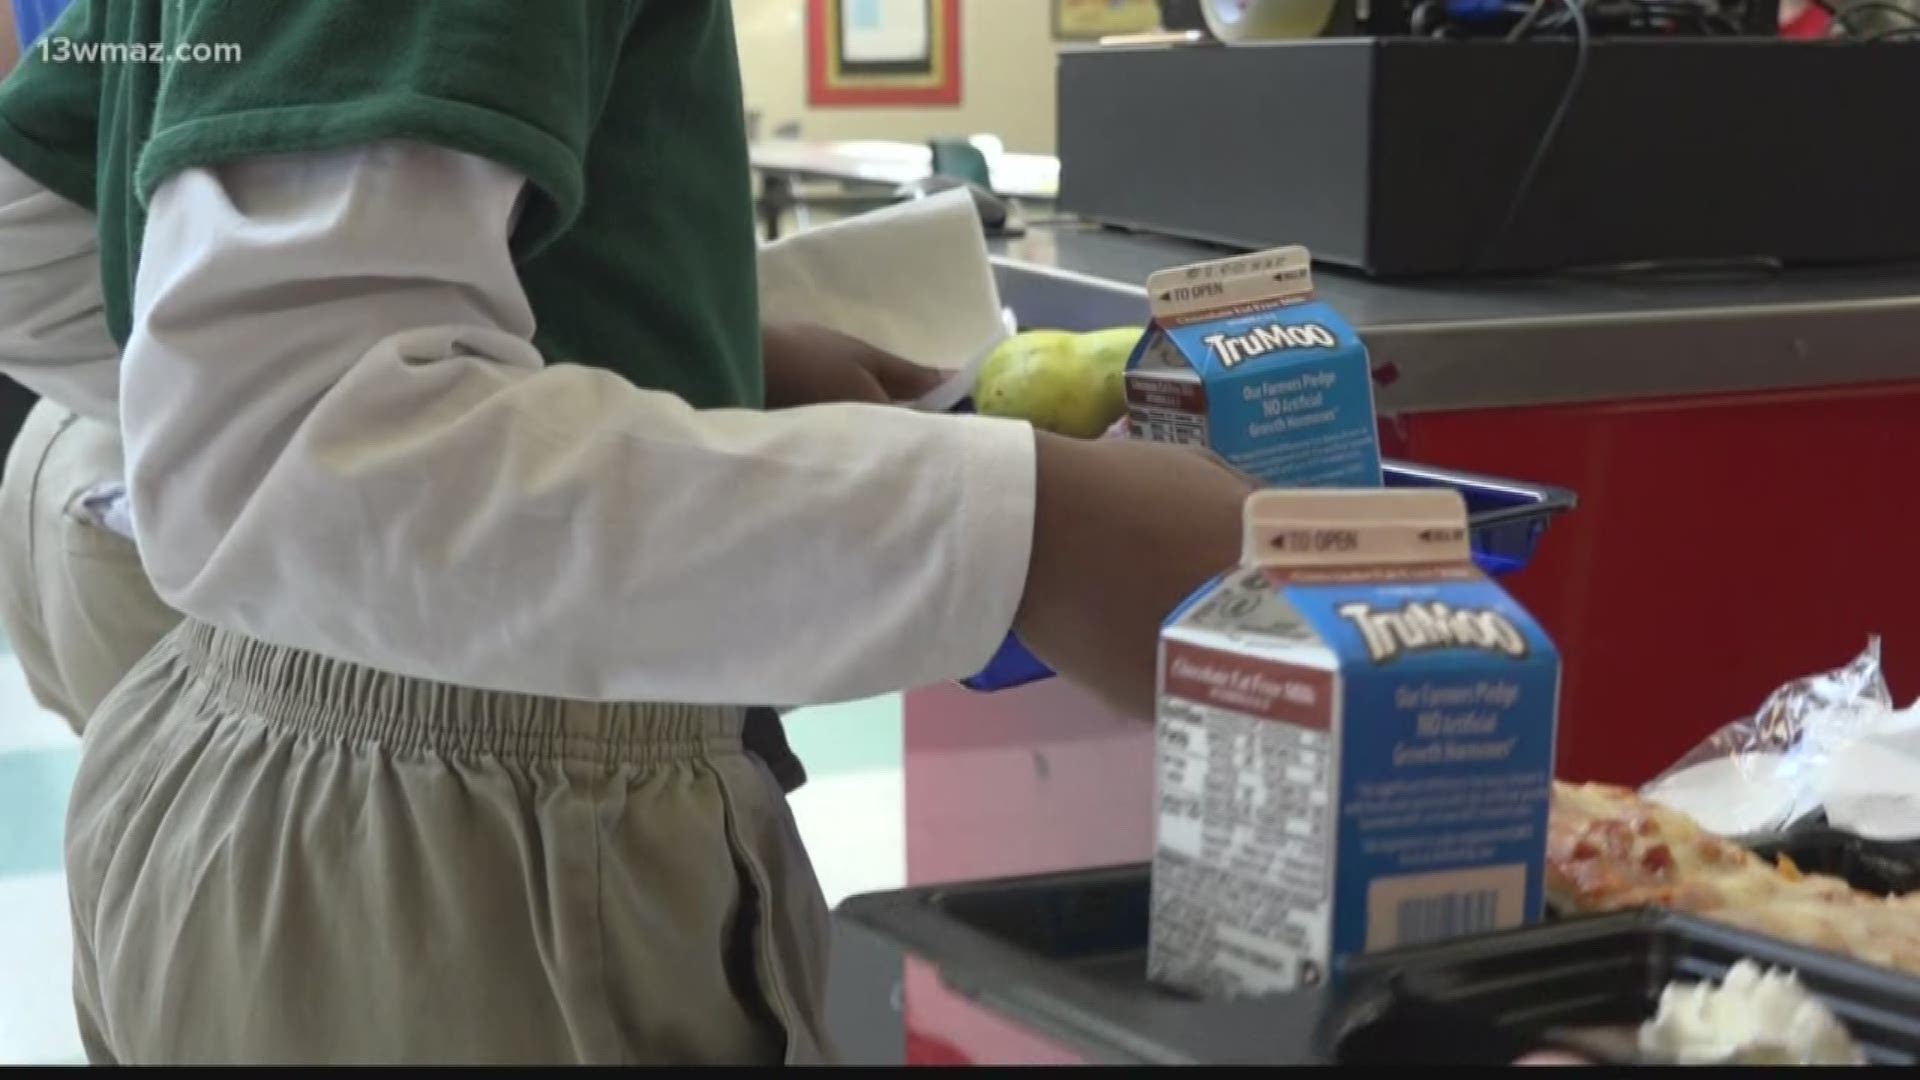 The Baldwin County School District is offering dinner to students in after-school programs.